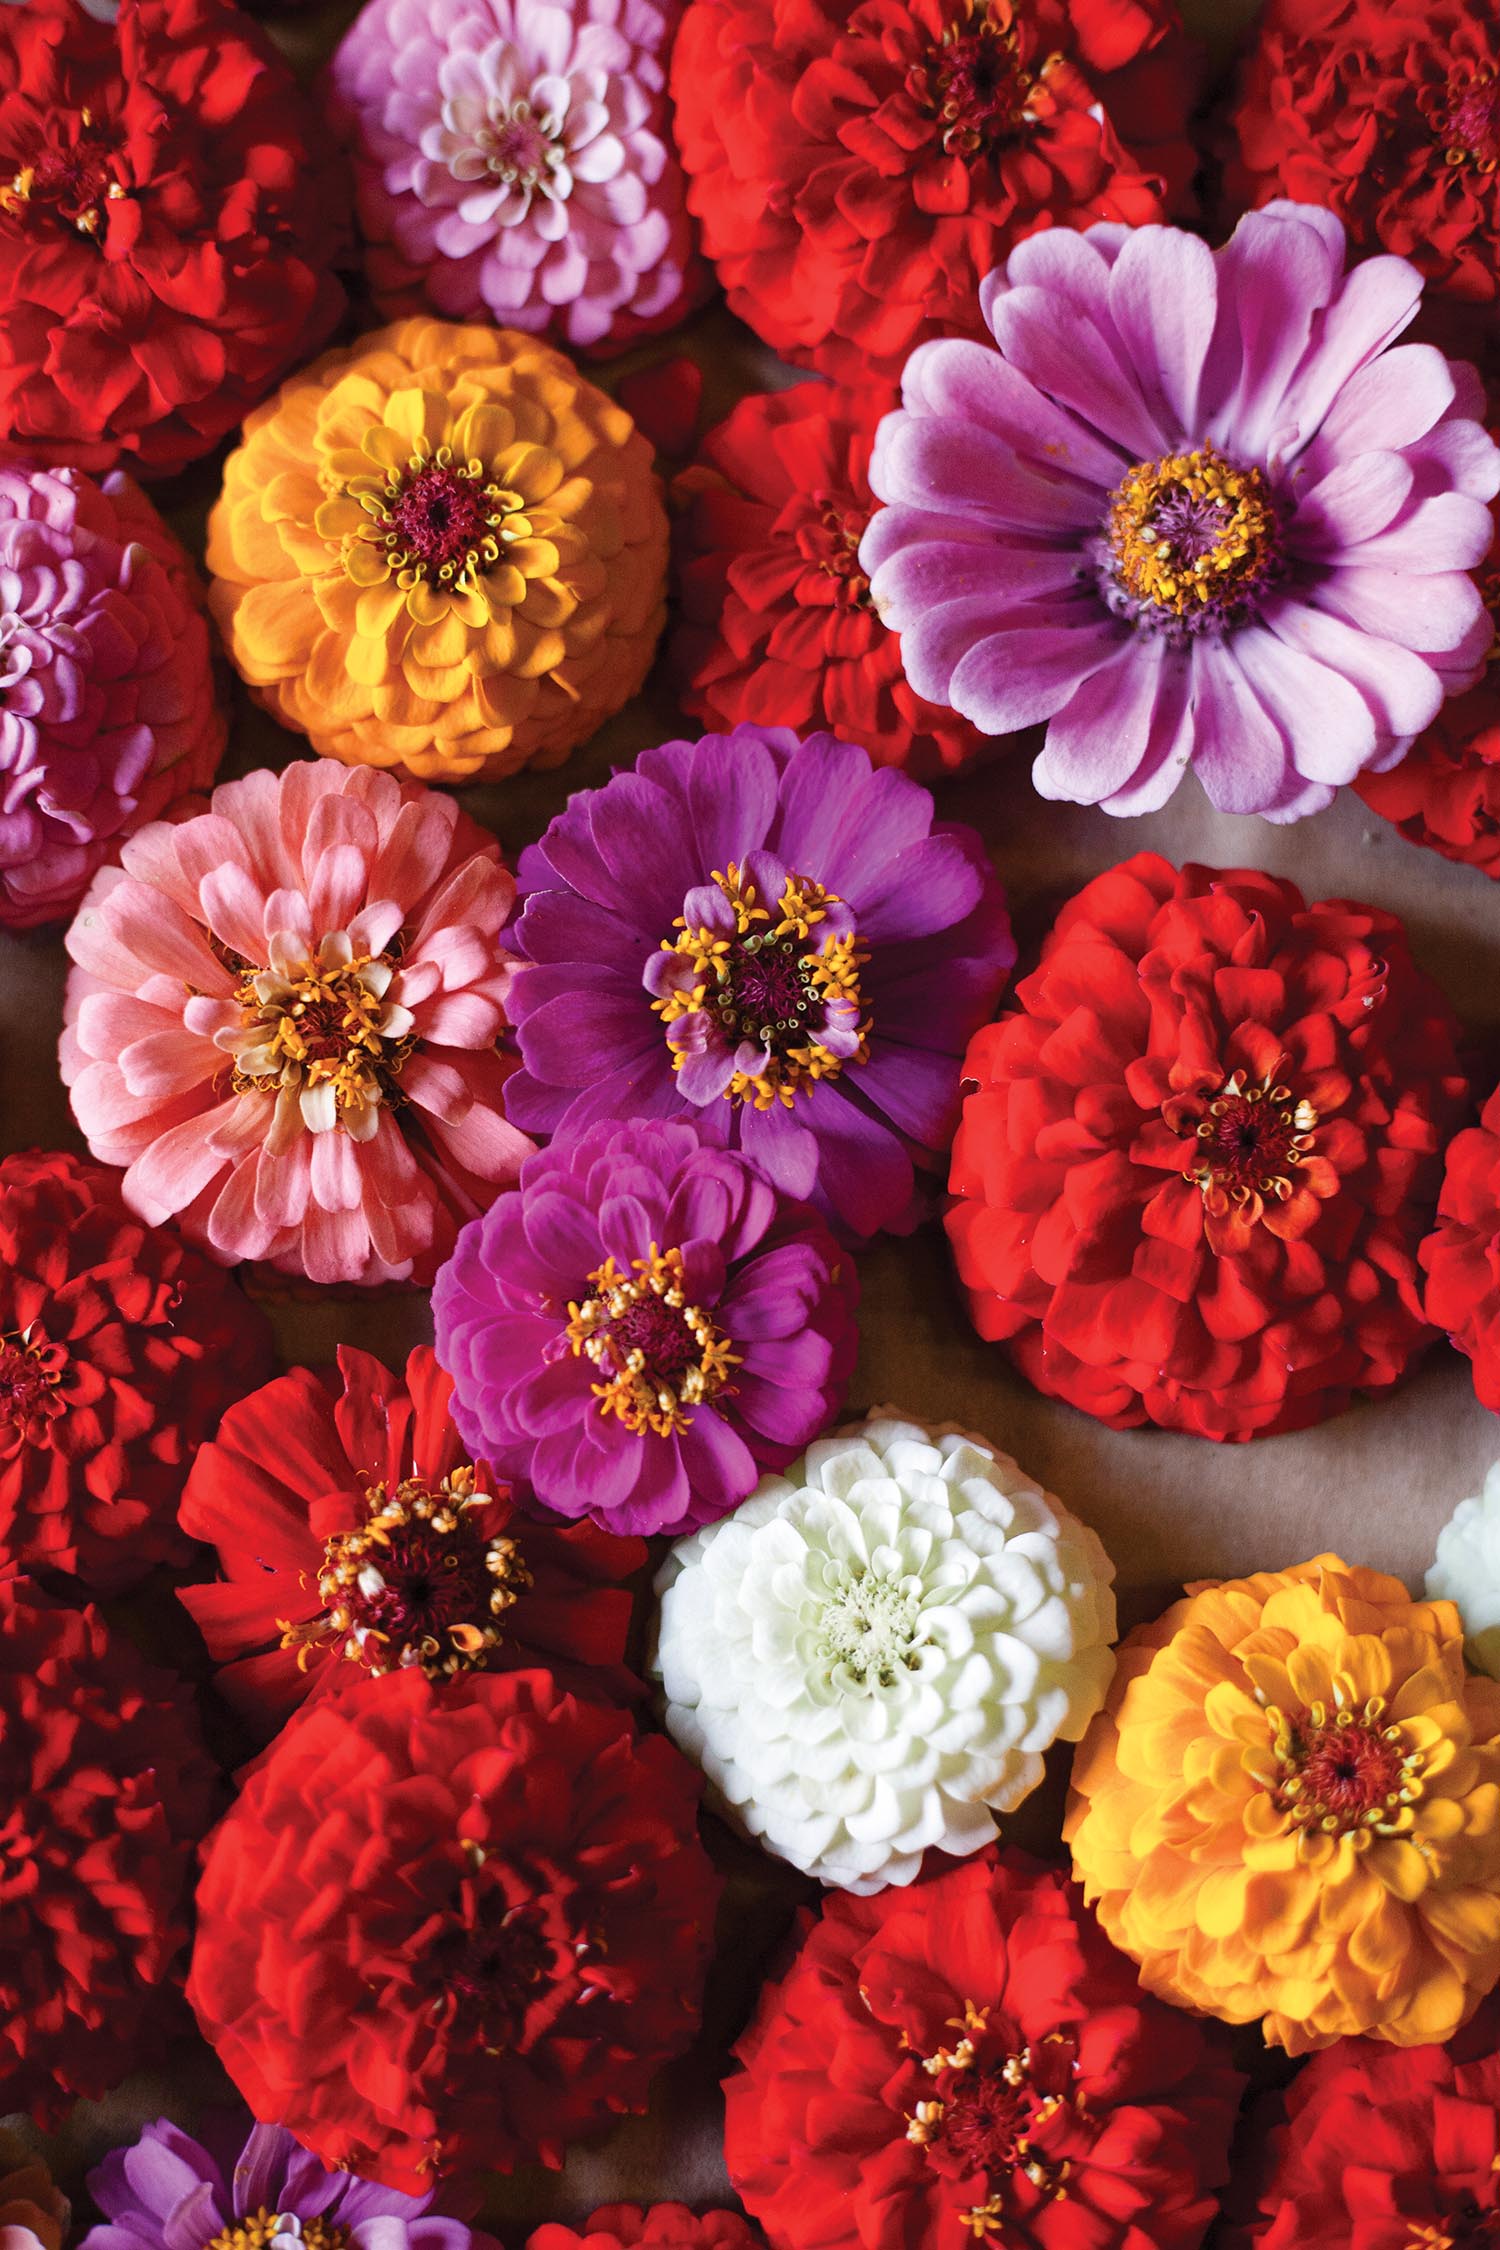 Pink, red, purple, white, and yellow zinna flowers